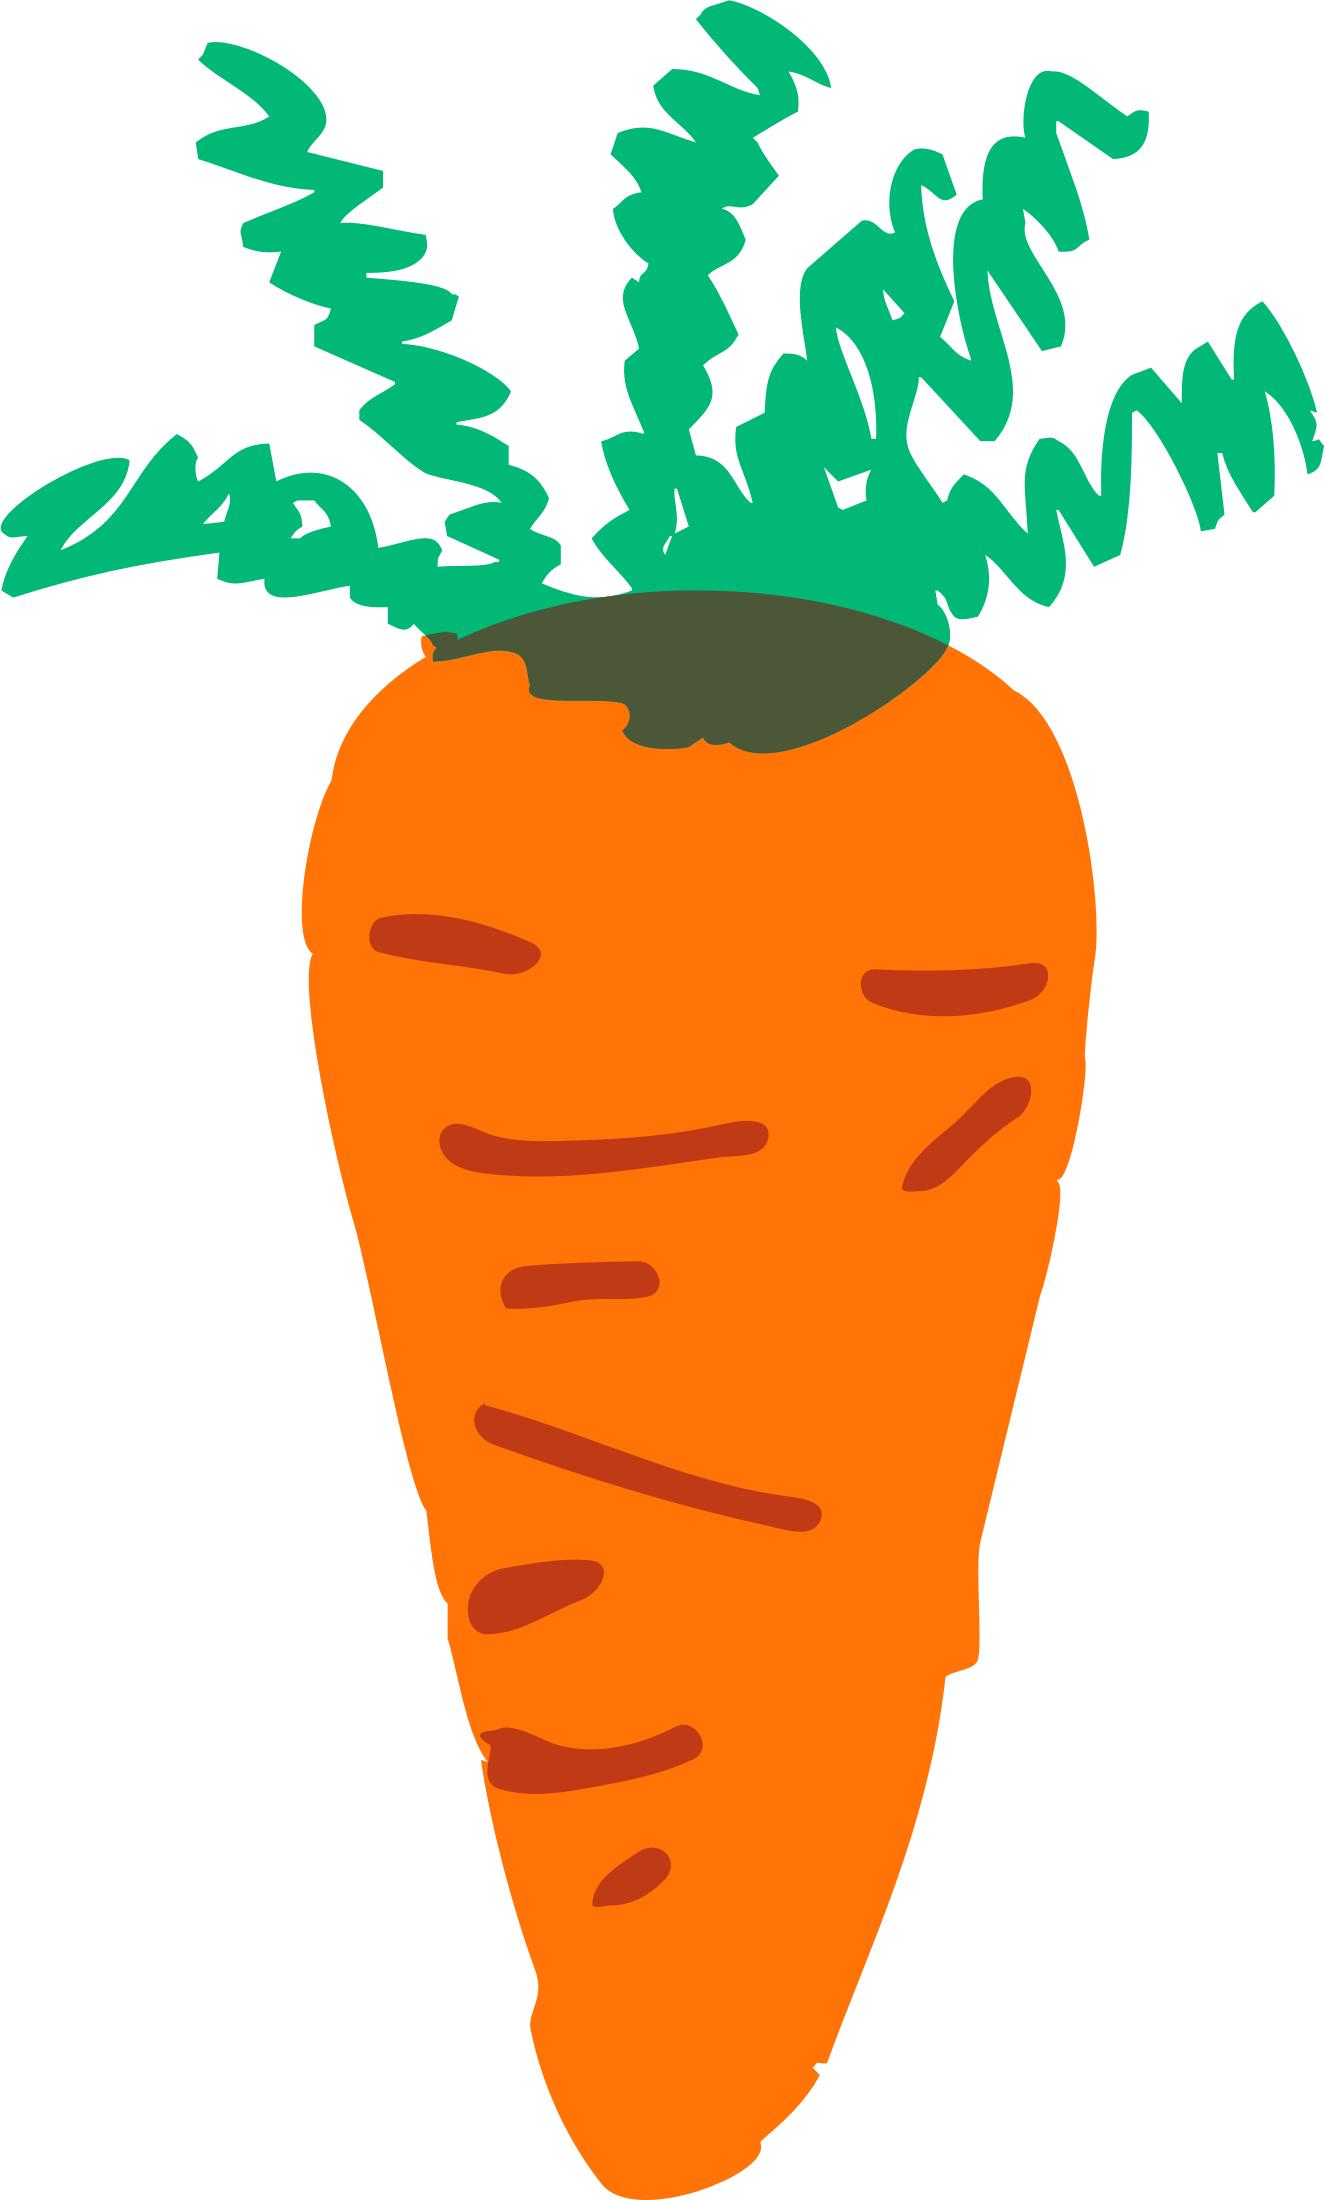 Carrot png